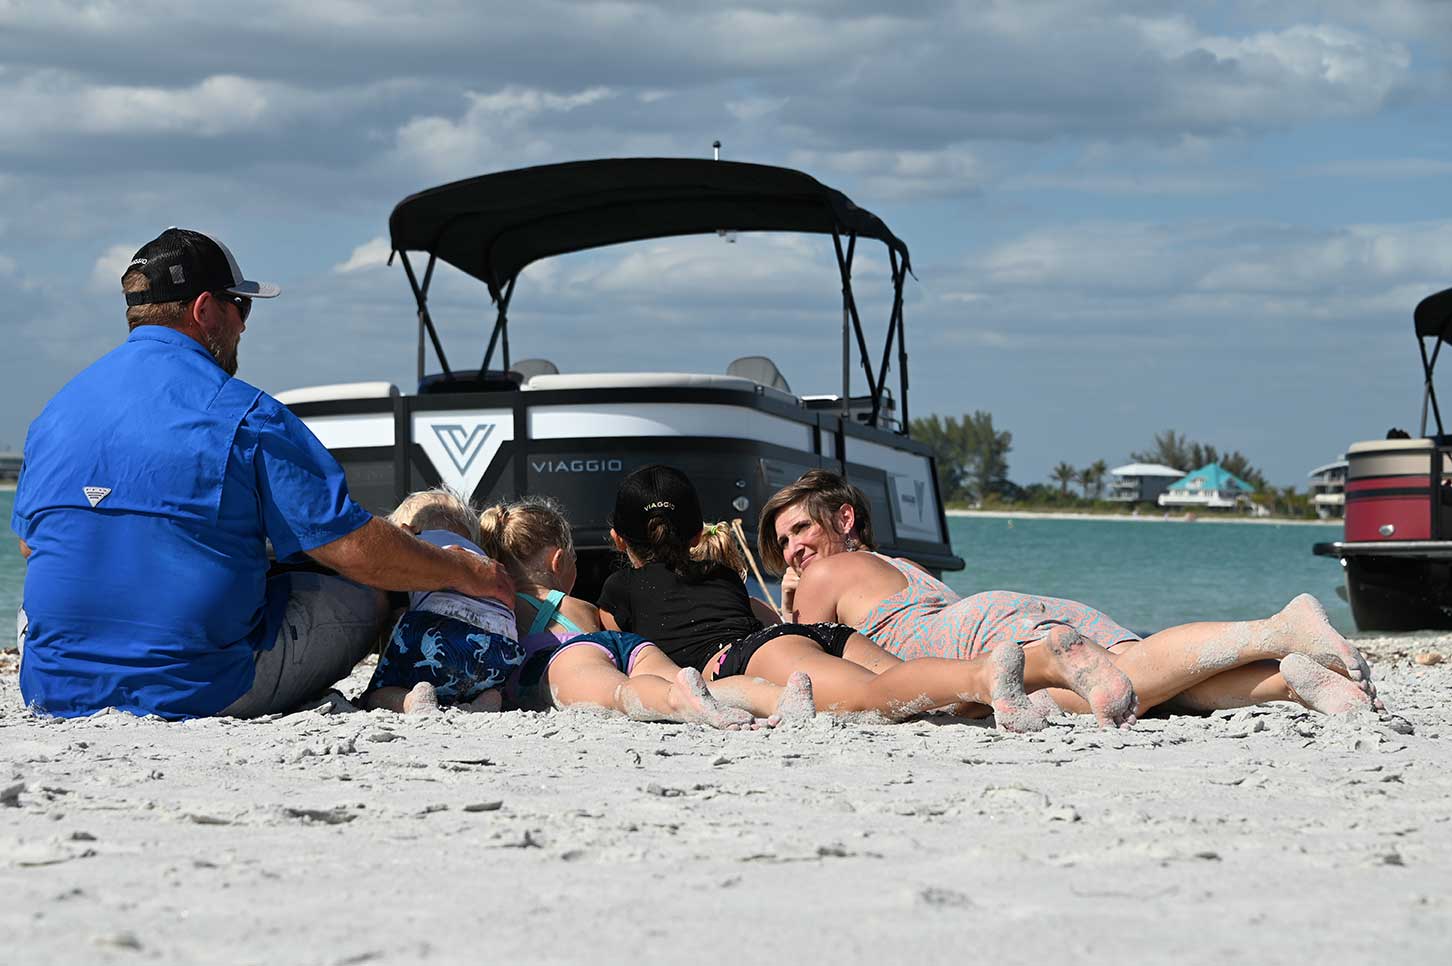 The family relaxing on the Sand at Gasparilla in Southern Florida